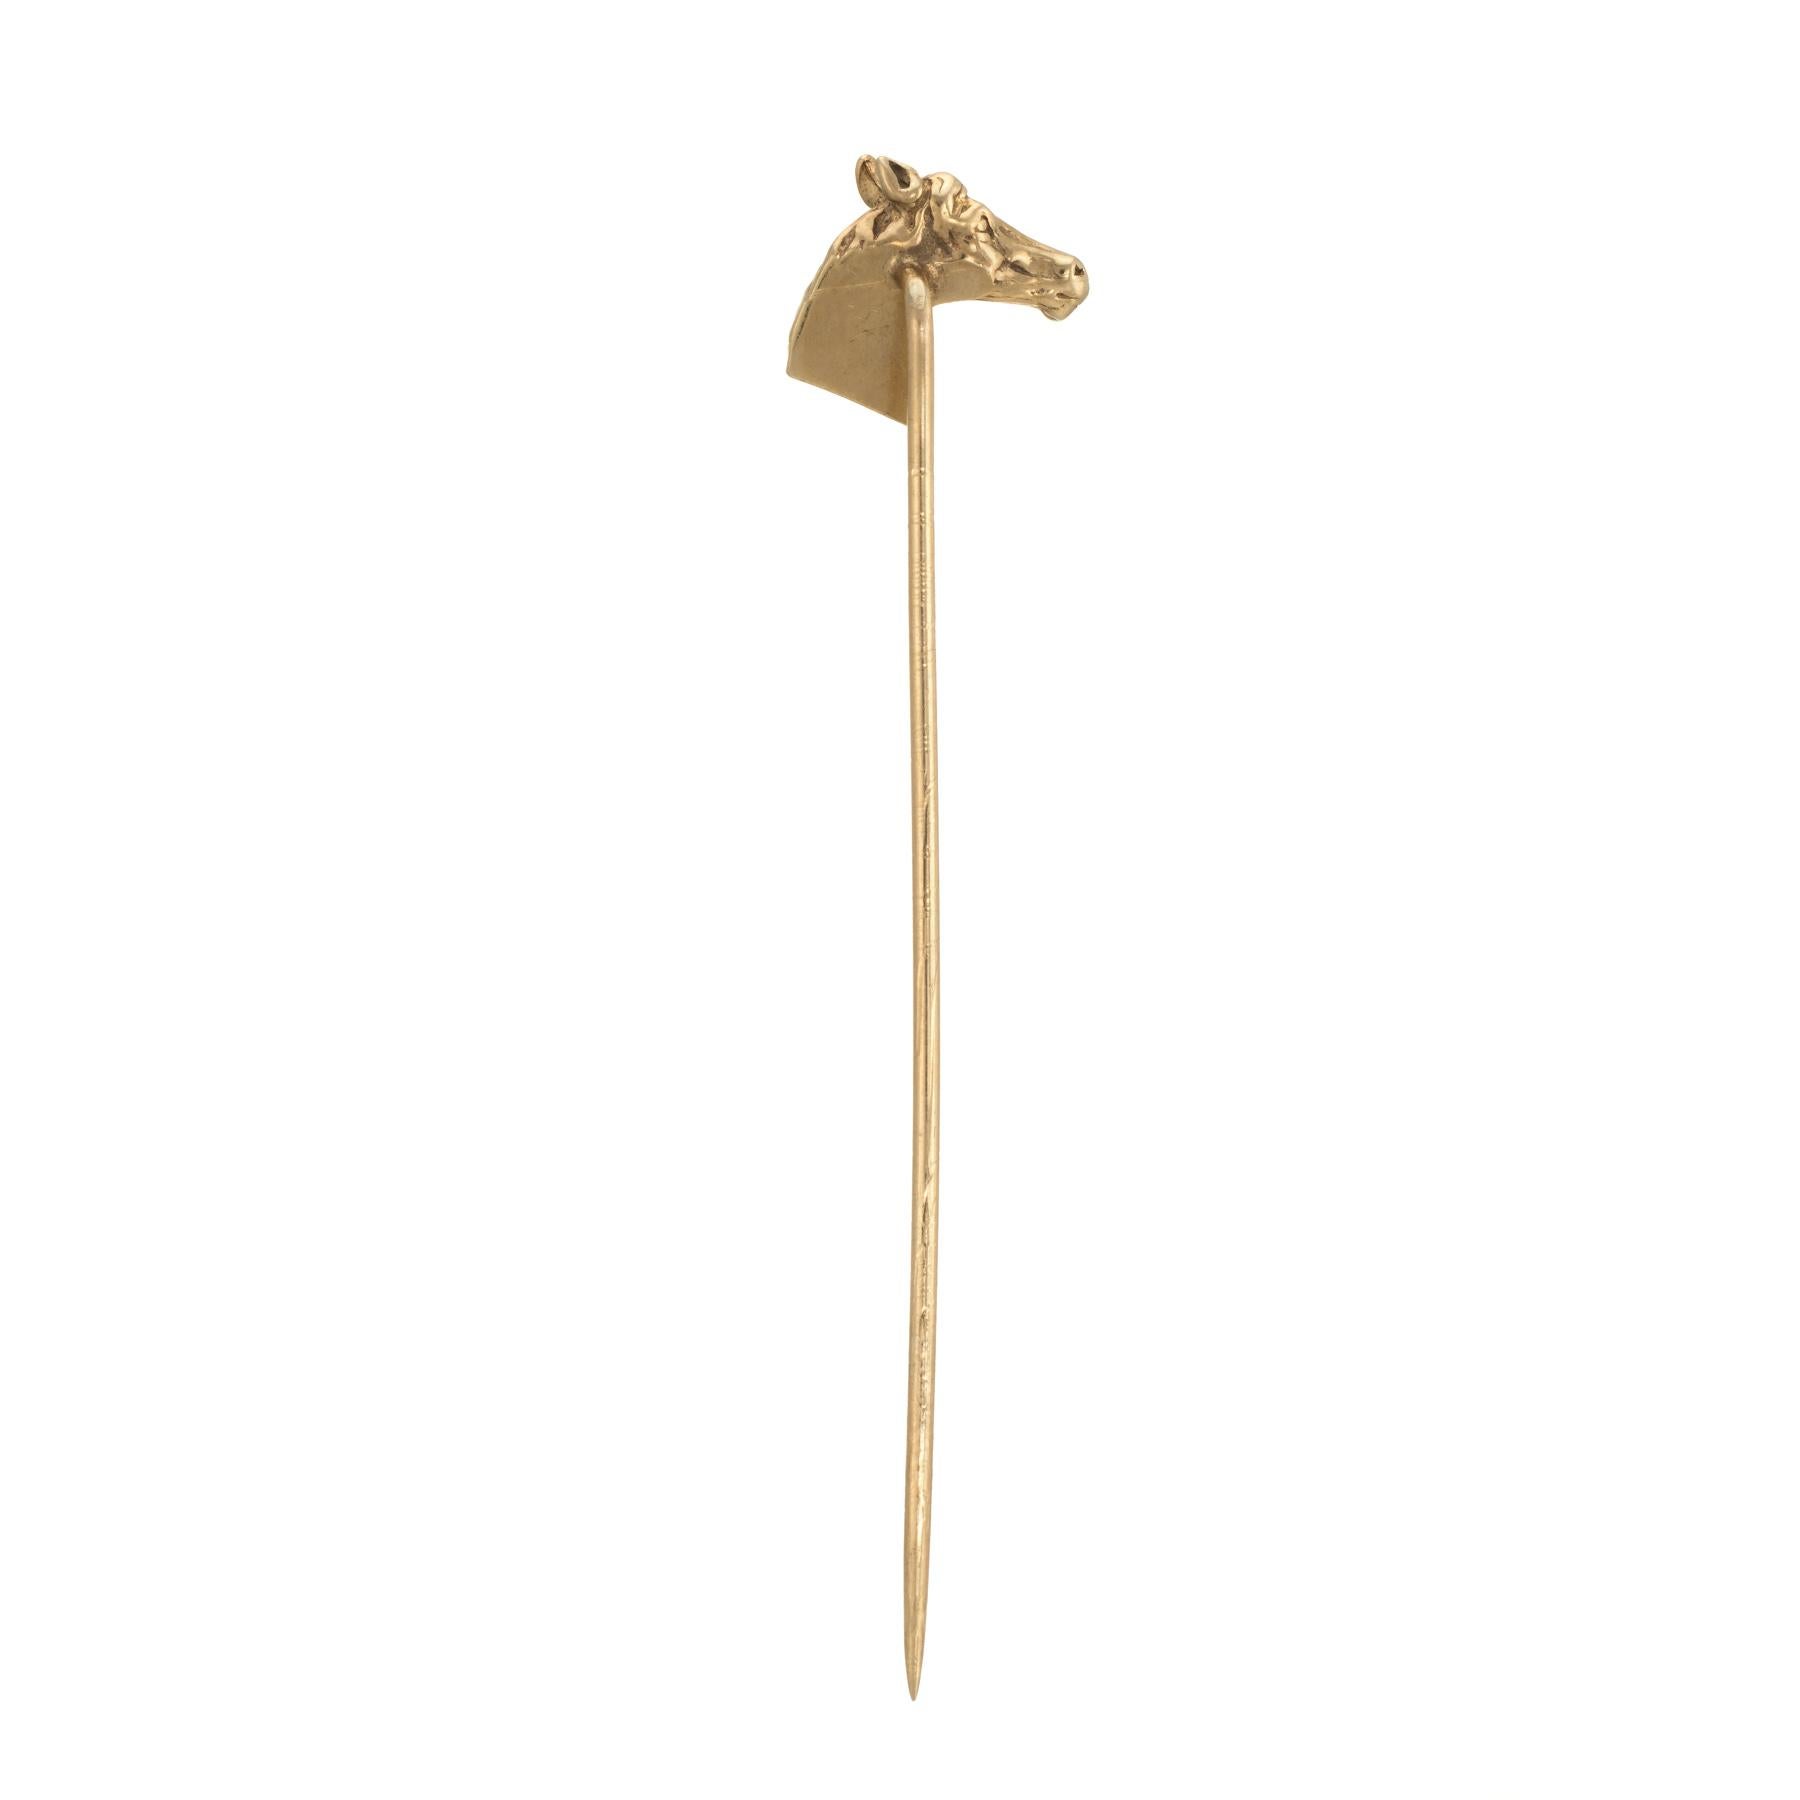 Finely detailed vintage Tiffany & Co stick pin, crafted in 14 karat yellow gold. 

The horse head is realistically detailed with sleek muscle form and definition to the facial features.

The stick pin is in very good condition.